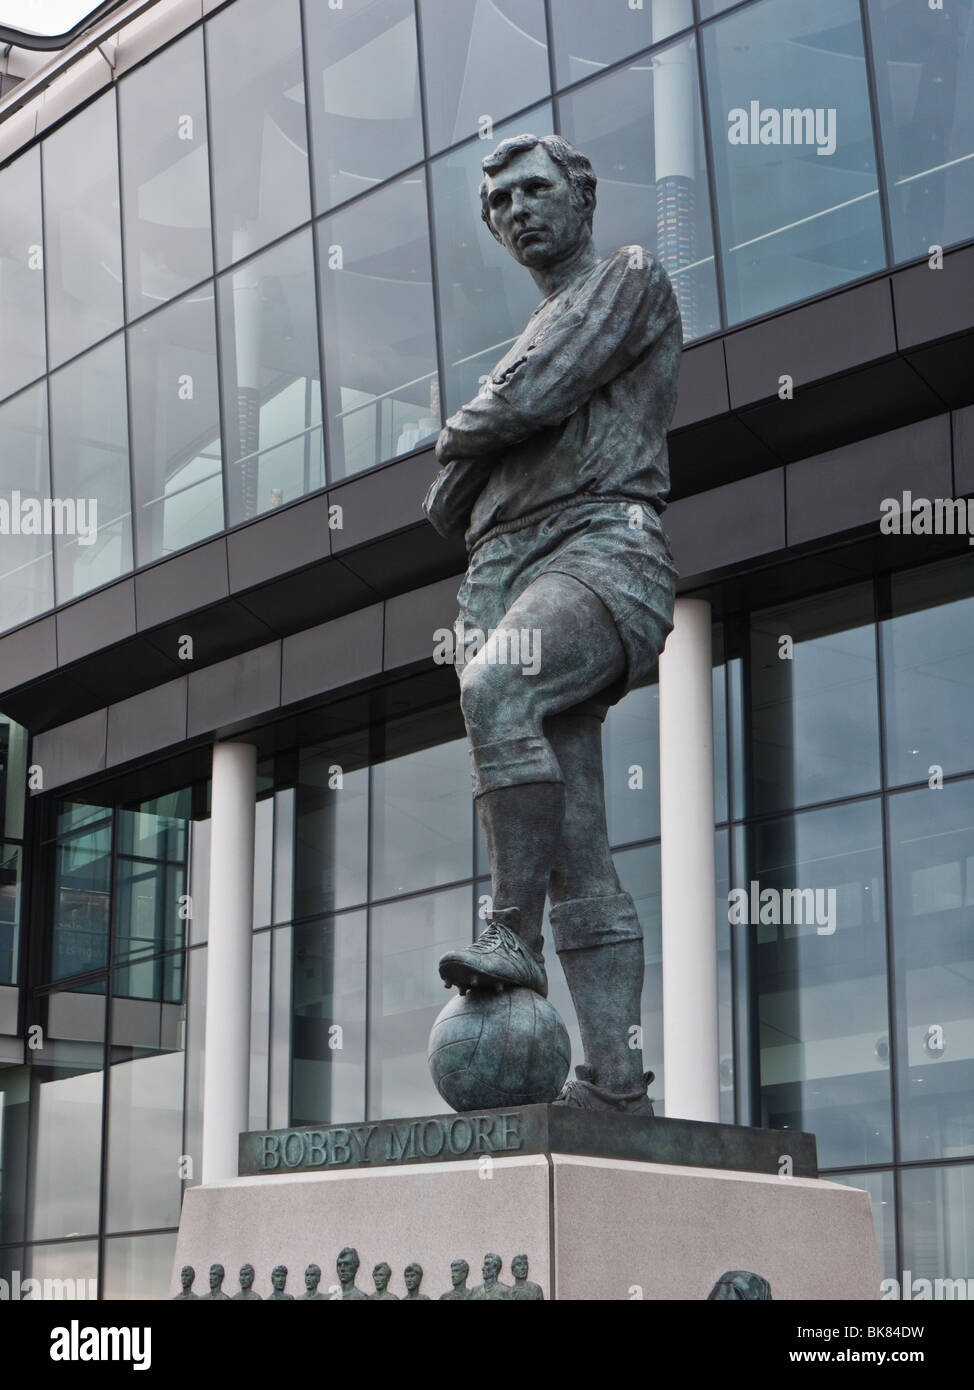 Statue of Sir Bobby Moore, Captain of the England football (soccer) team, 1966 world cup winners, new Wembley stadium London UK Stock Photo